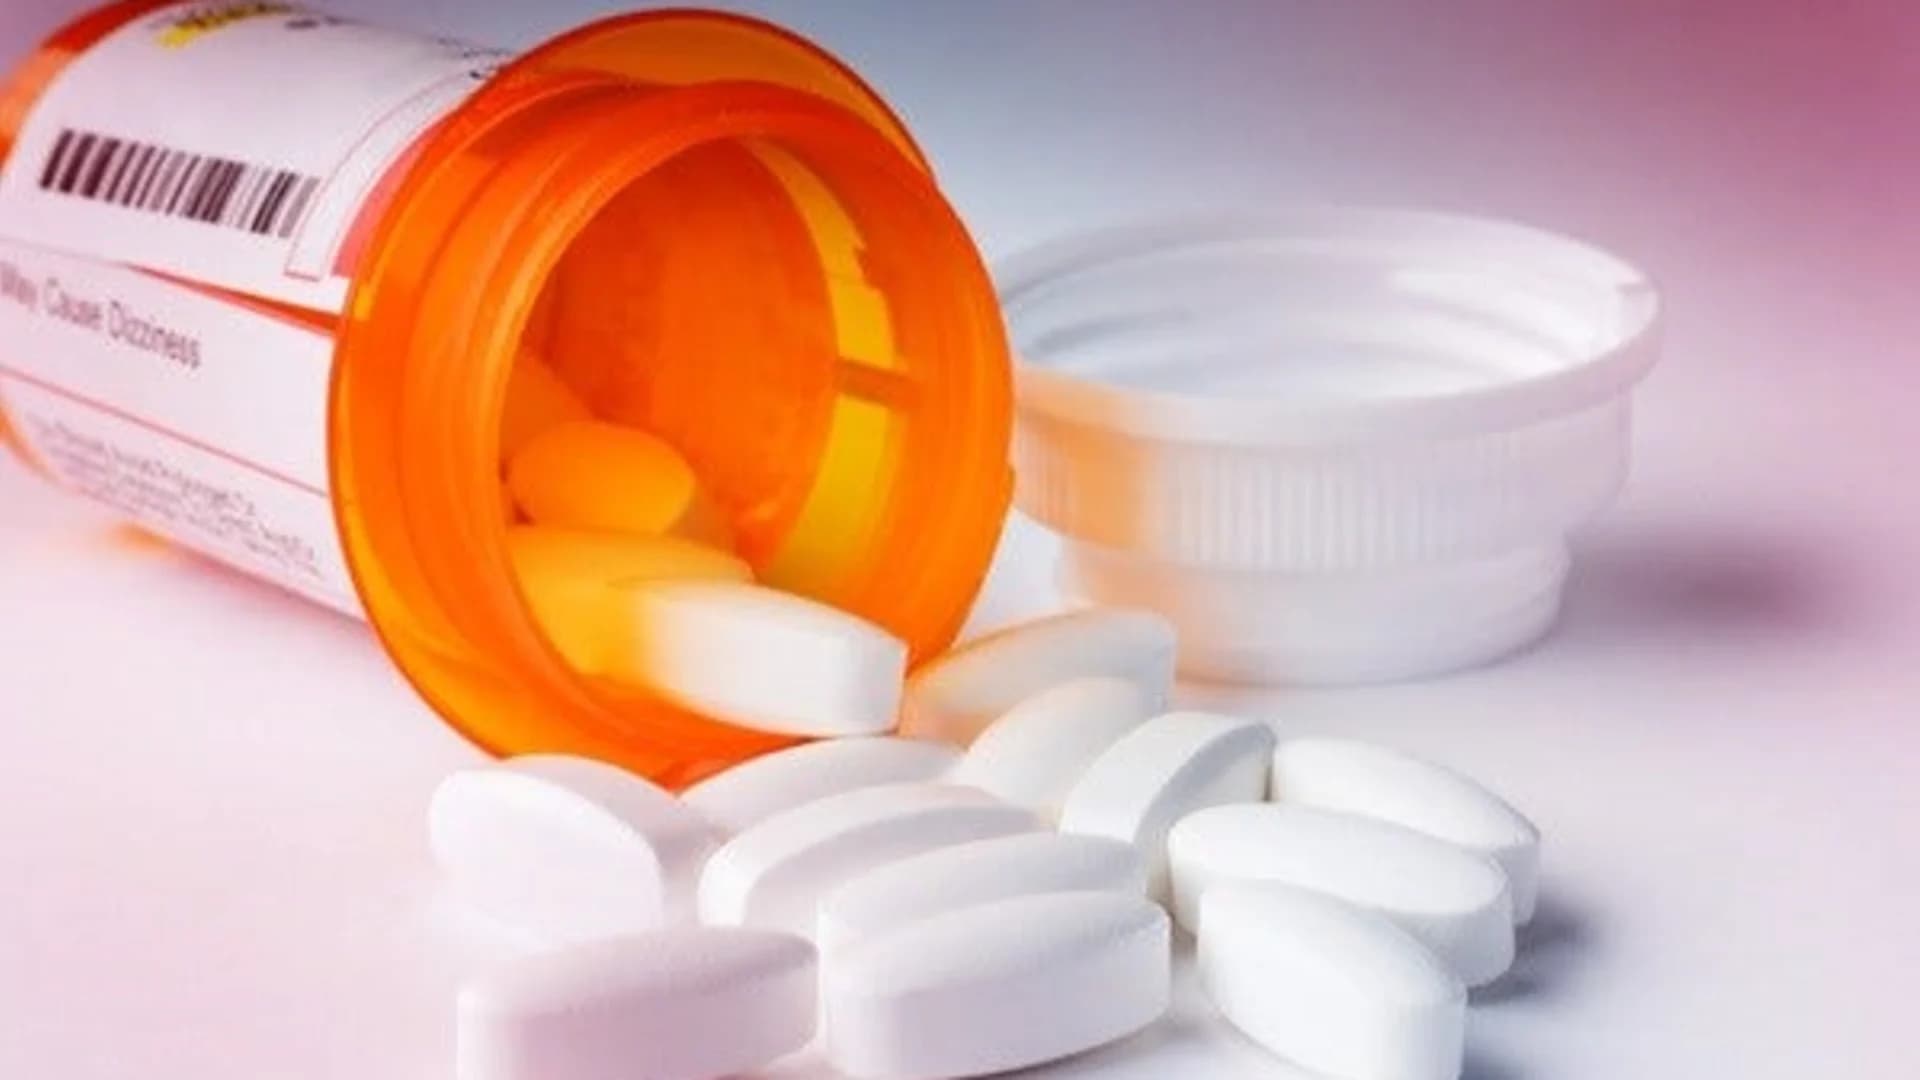 Local groups to receive grants for opioid treatment, education programs